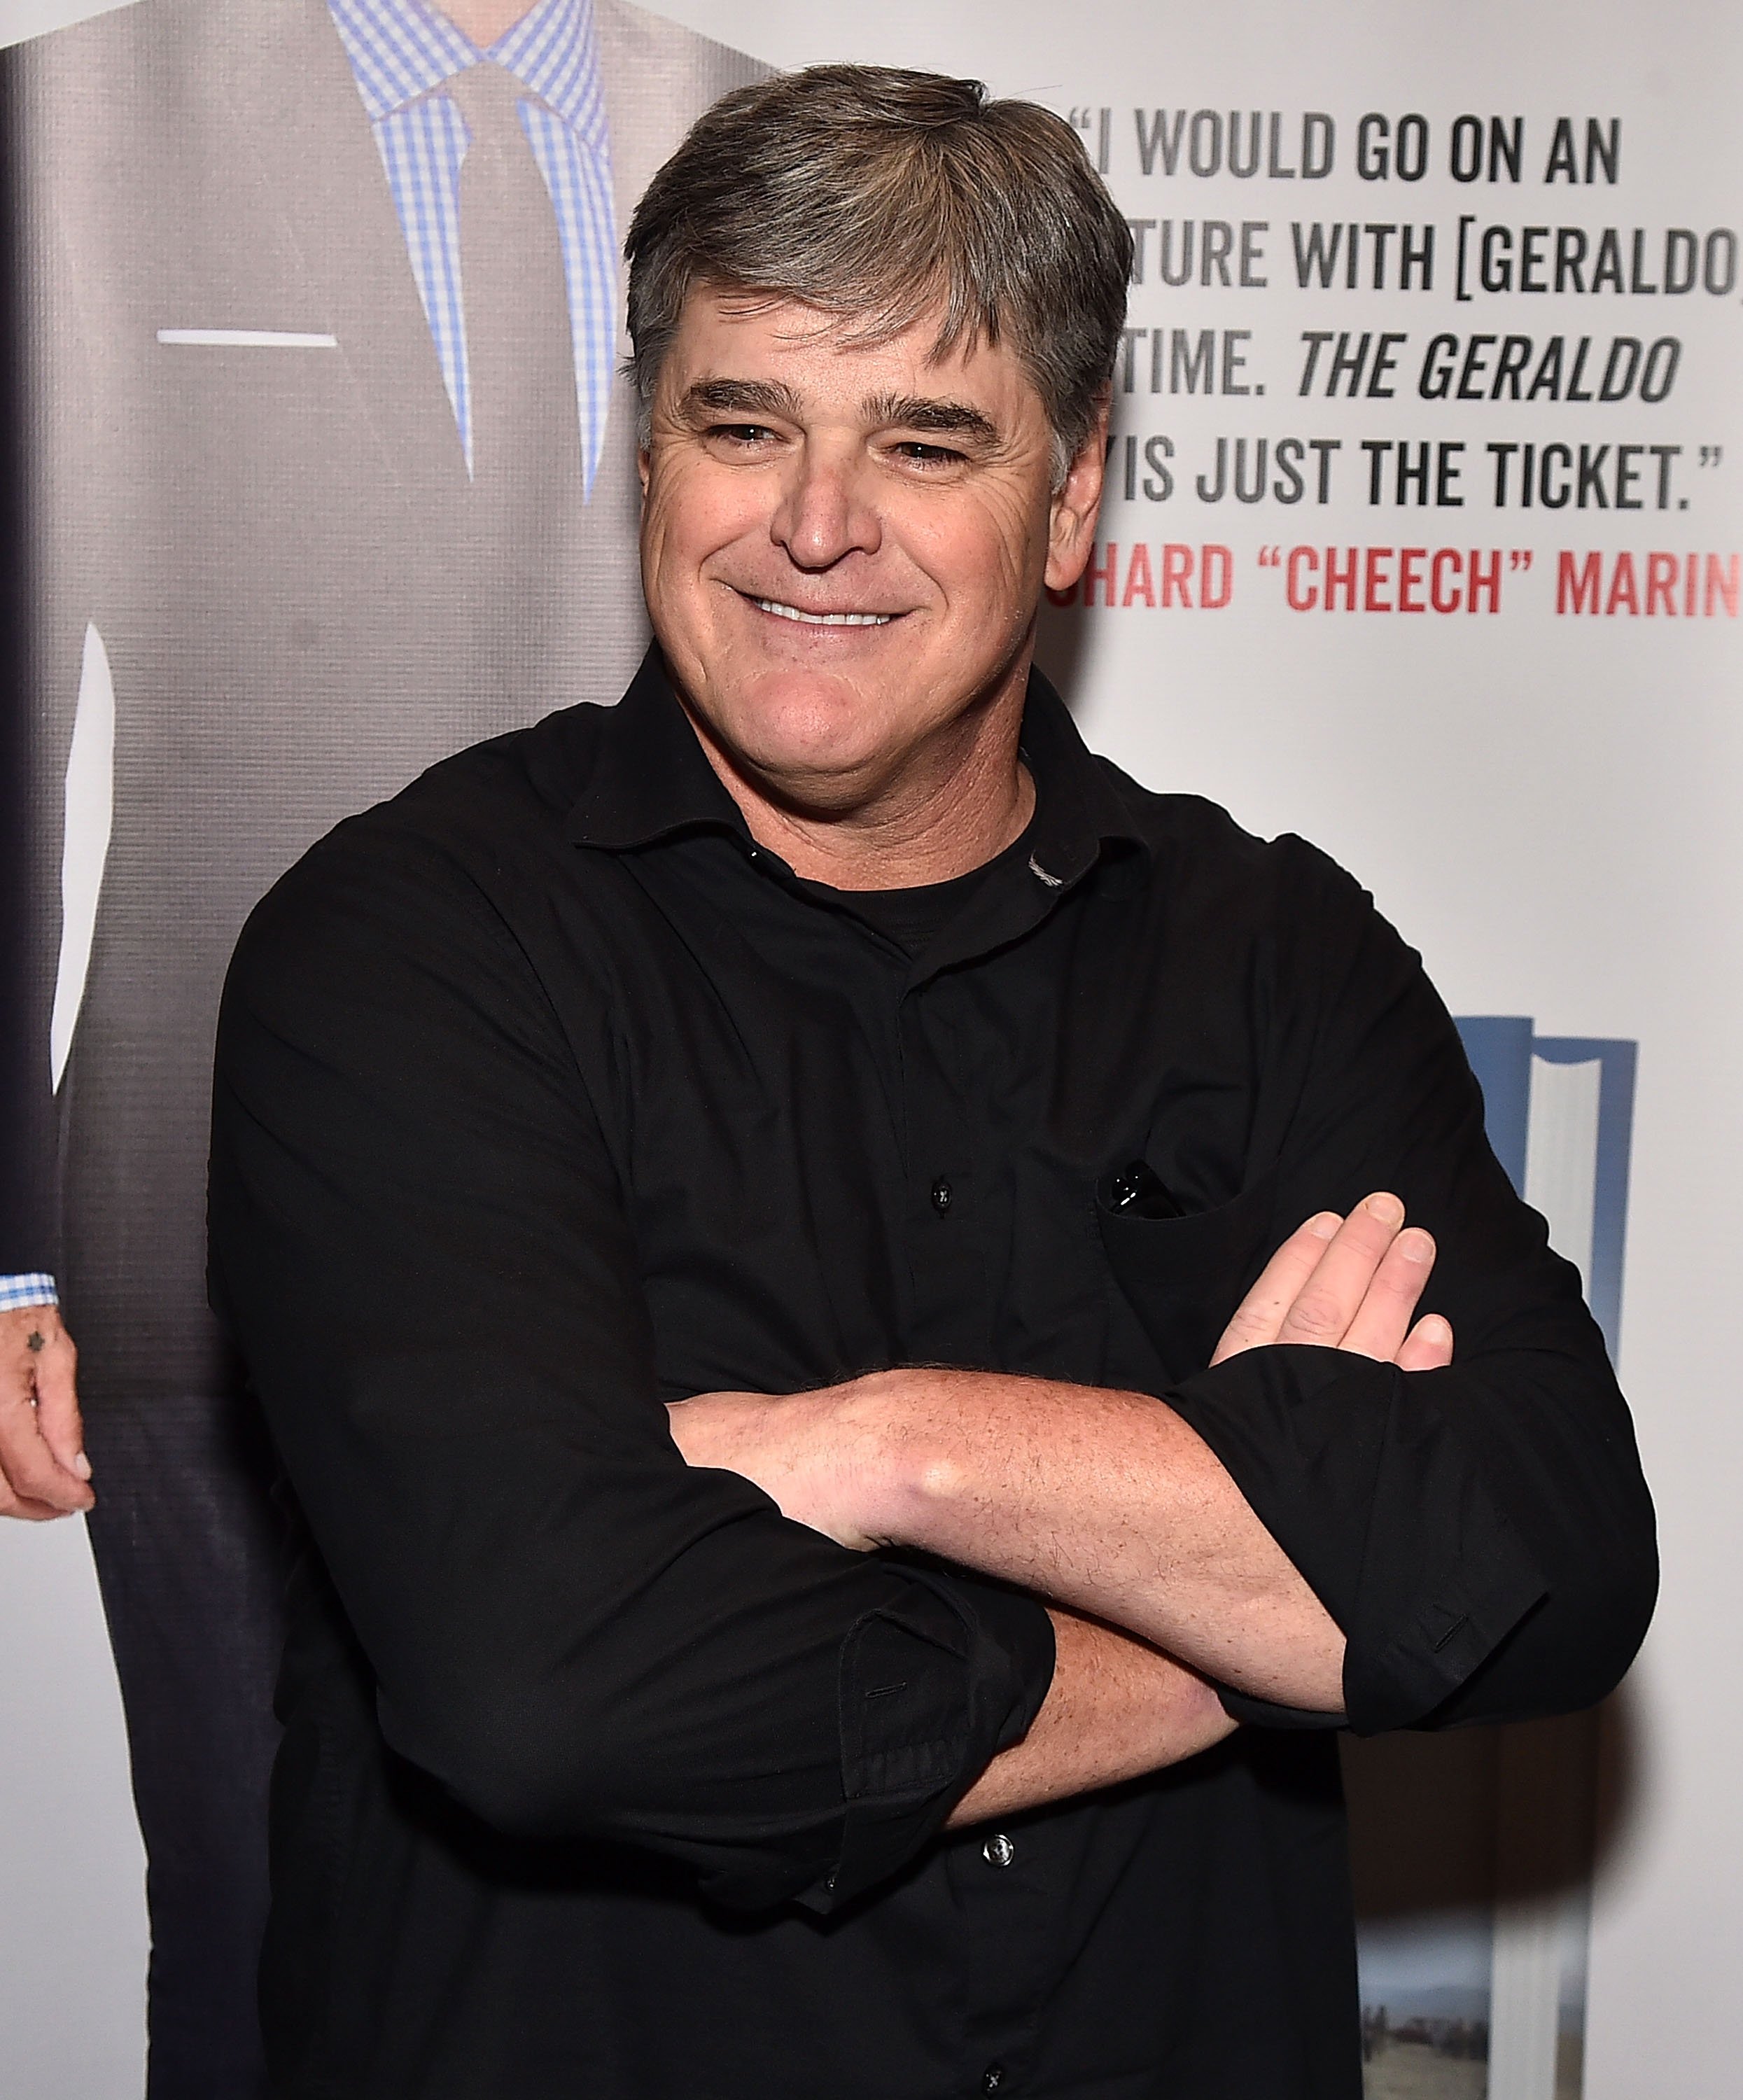 Sean Hannity at the launch of Geraldo Rivera's book "The Geraldo Show: A Memoir" on April 2, 2018 | Source: Getty Images